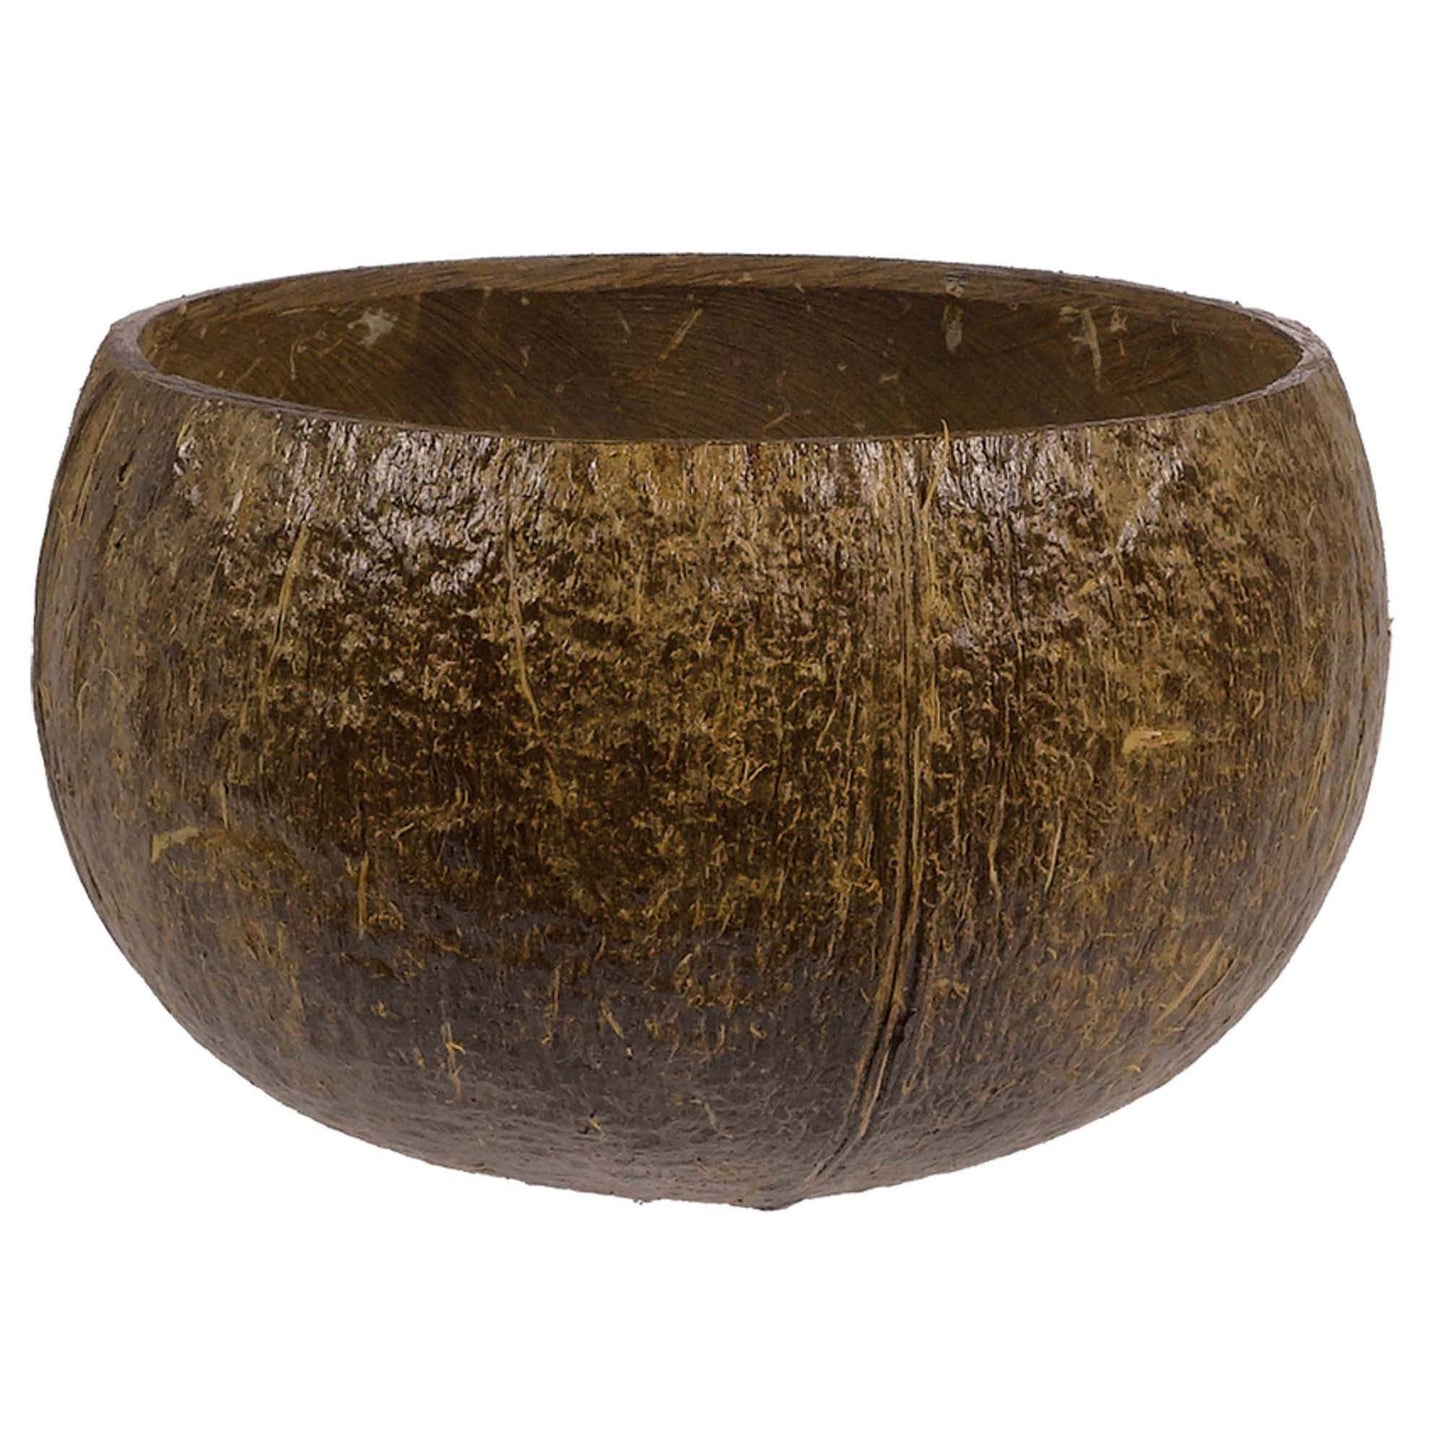 Authentic Coconut Cup